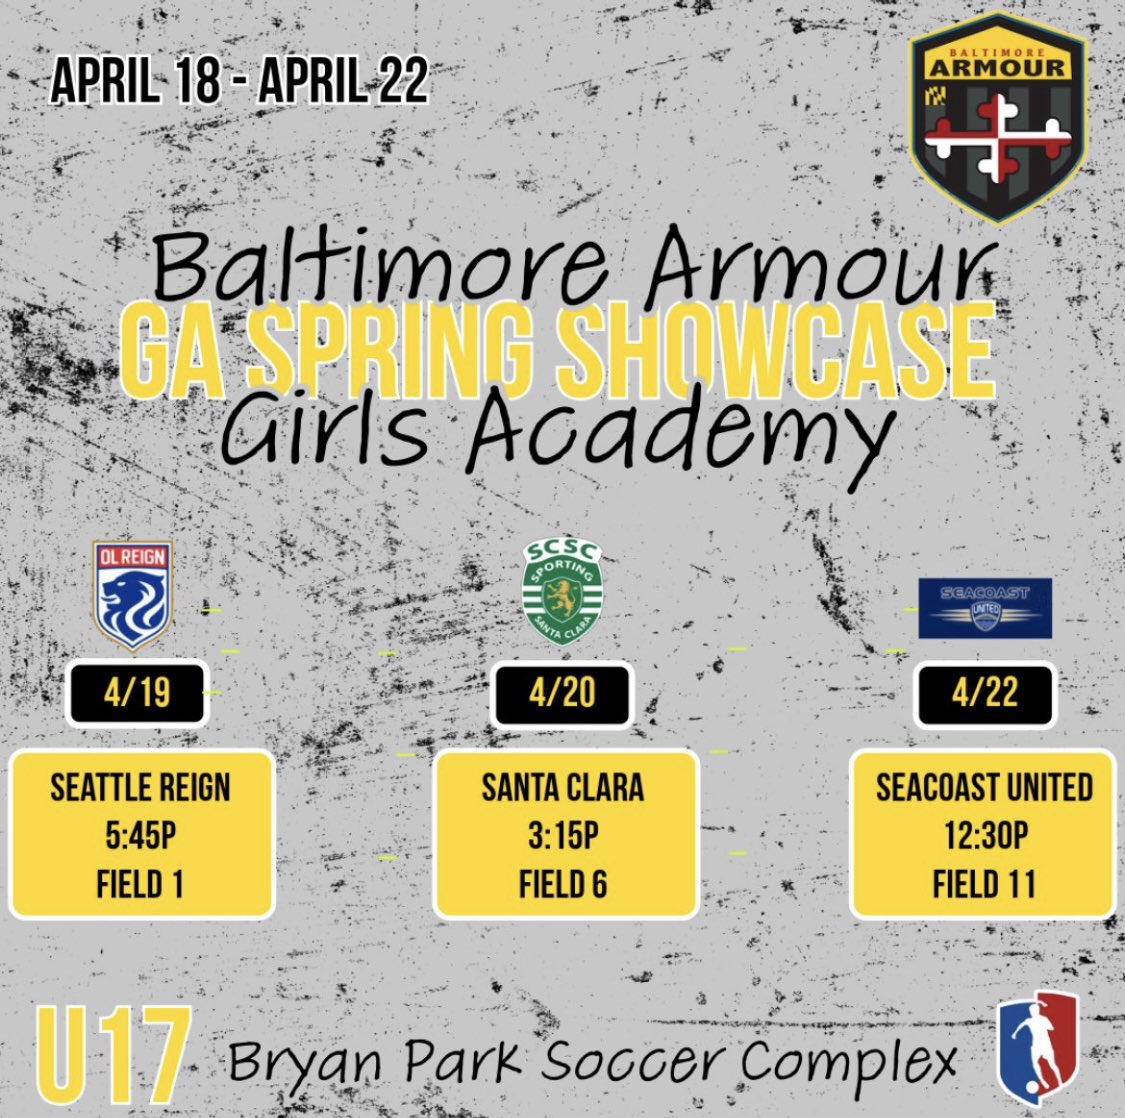 Let’s GO @bagirlsacademy Looking forward to #GASpring competition! Schedule⬇️ system.gotsport.com/org_event/even… @ImYouthSoccer @ImCollegeSoccer @TopDrawerSoccer @TheSoccerWire @PrepSoccer @SoccerMomInt @DMVSoccer96 @BaltNGSoccer @TopPreps @MaxPreps #GirlsAcademy #ArmourUp